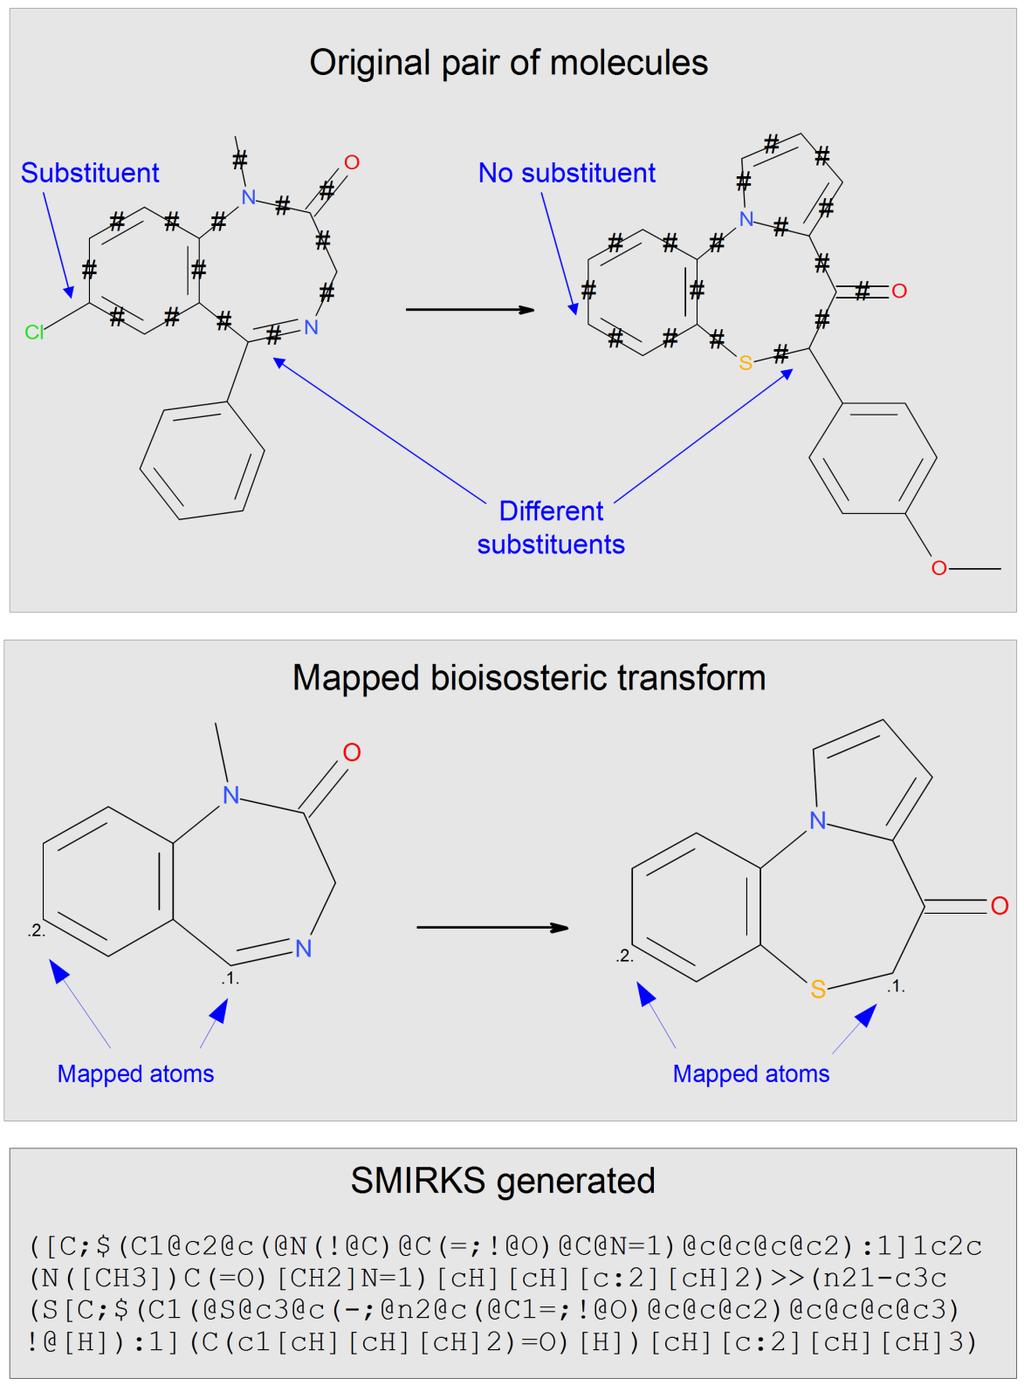 Figure 1. Illustration of the process of generating a transformation from a pair of bioisosteric compounds.